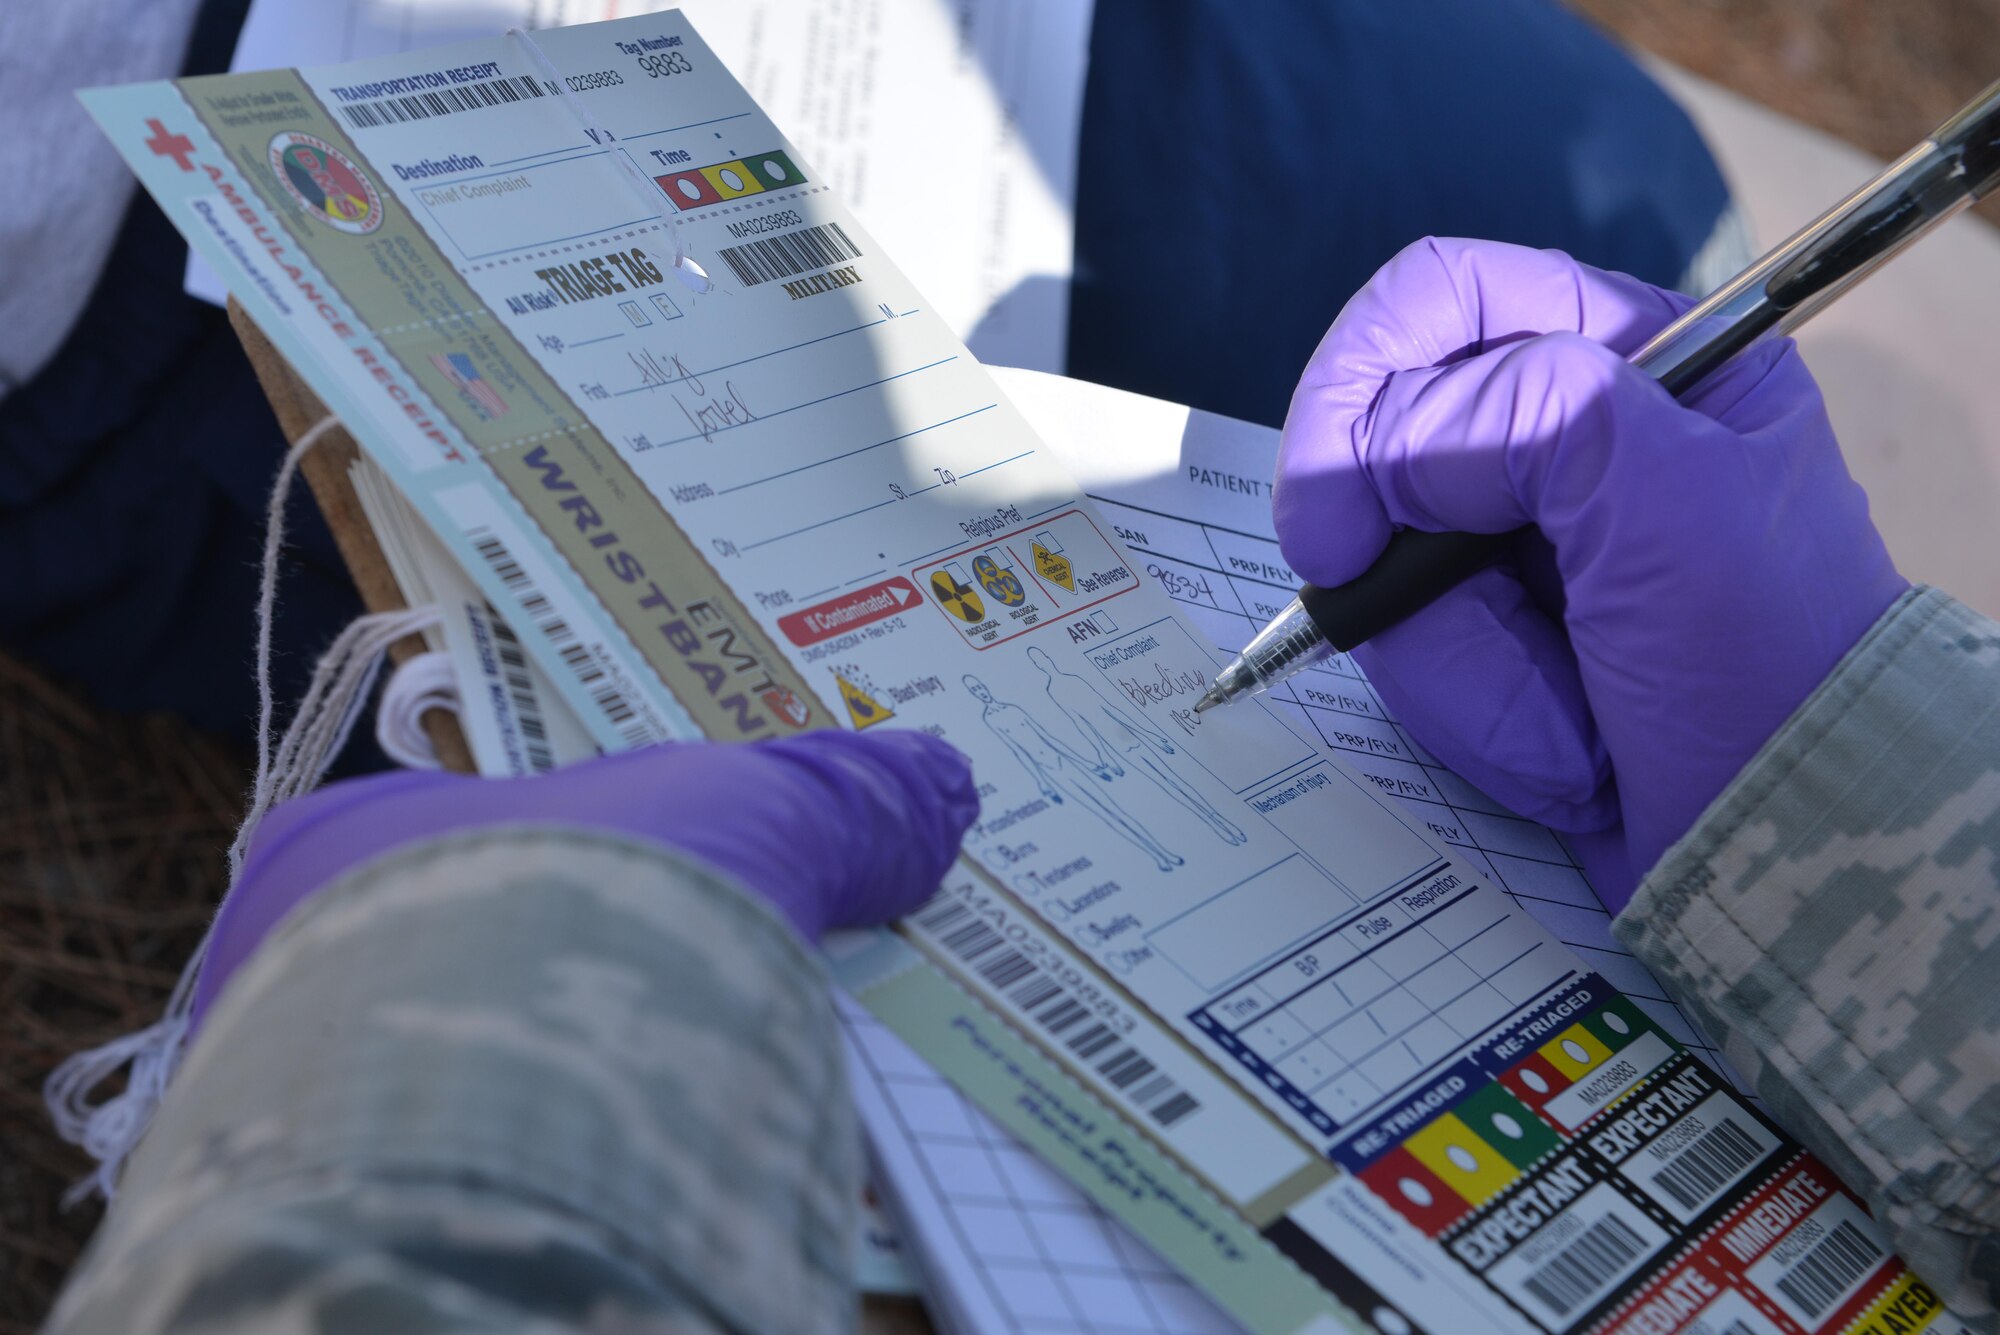 U.S. Air Force Tech. Sgt. Marinelle Bland, 39th Medical Operations Squadron medical admin, completes a triage tag during a mass casualty exercise Sept. 21, 2016, at Incirlik Air Base, Turkey. On the triage tag, Airmen identify and annotate patient injuries for further care. (U.S. Air Force photo by Senior Airman John Nieves Camacho)